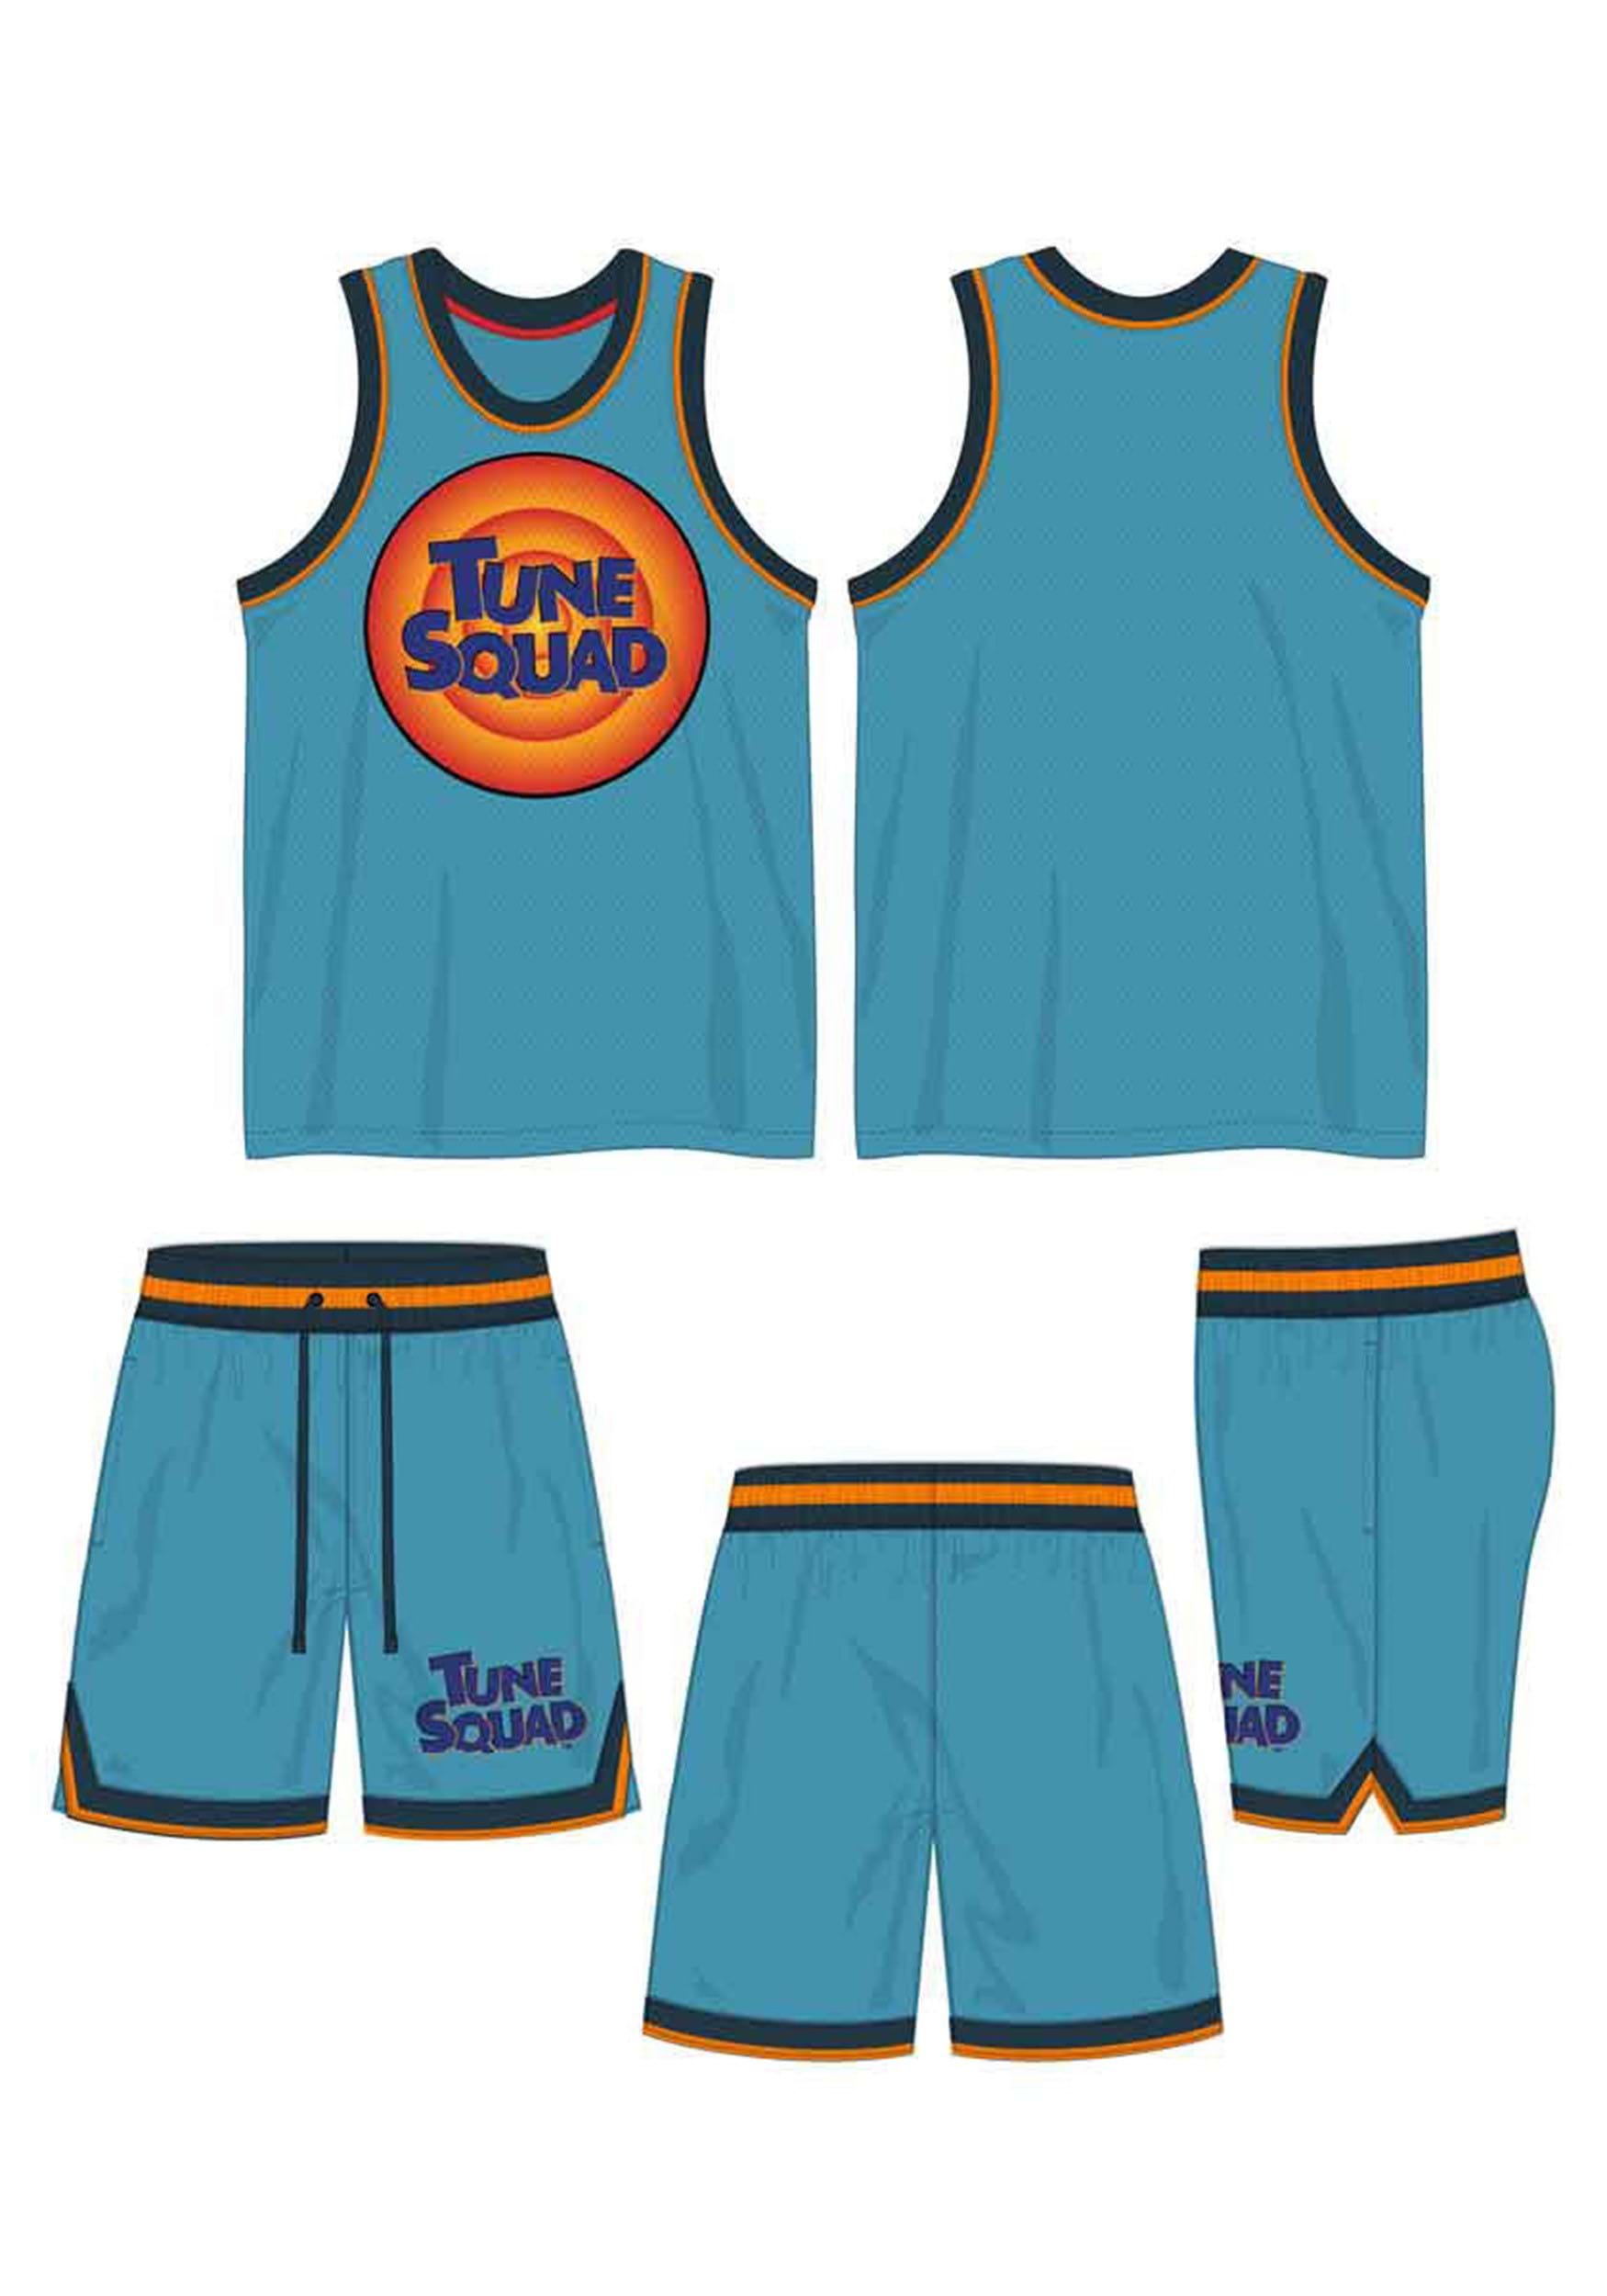 Jersey & Shorts From Space Jam A New Legacy - Tune Squad